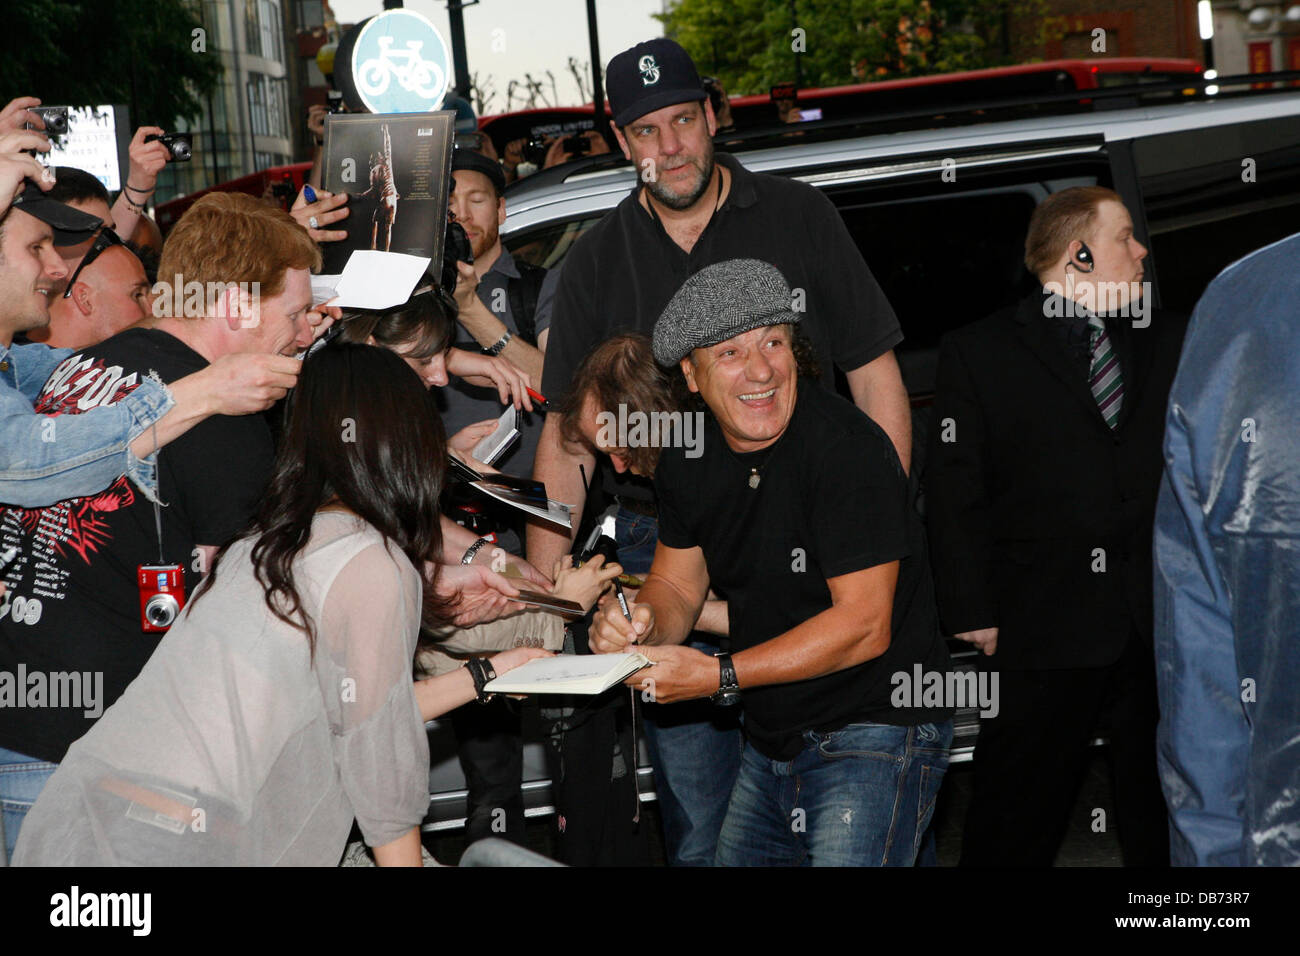 Malcolm Young, Cliff Williams, Angus Young and Brian Johnson of AC/DC Premiere of 'AC/DC - Live at River Plate' at Hammersmith Apollo - Arrivals London, England - 06.05.11 Stock Photo